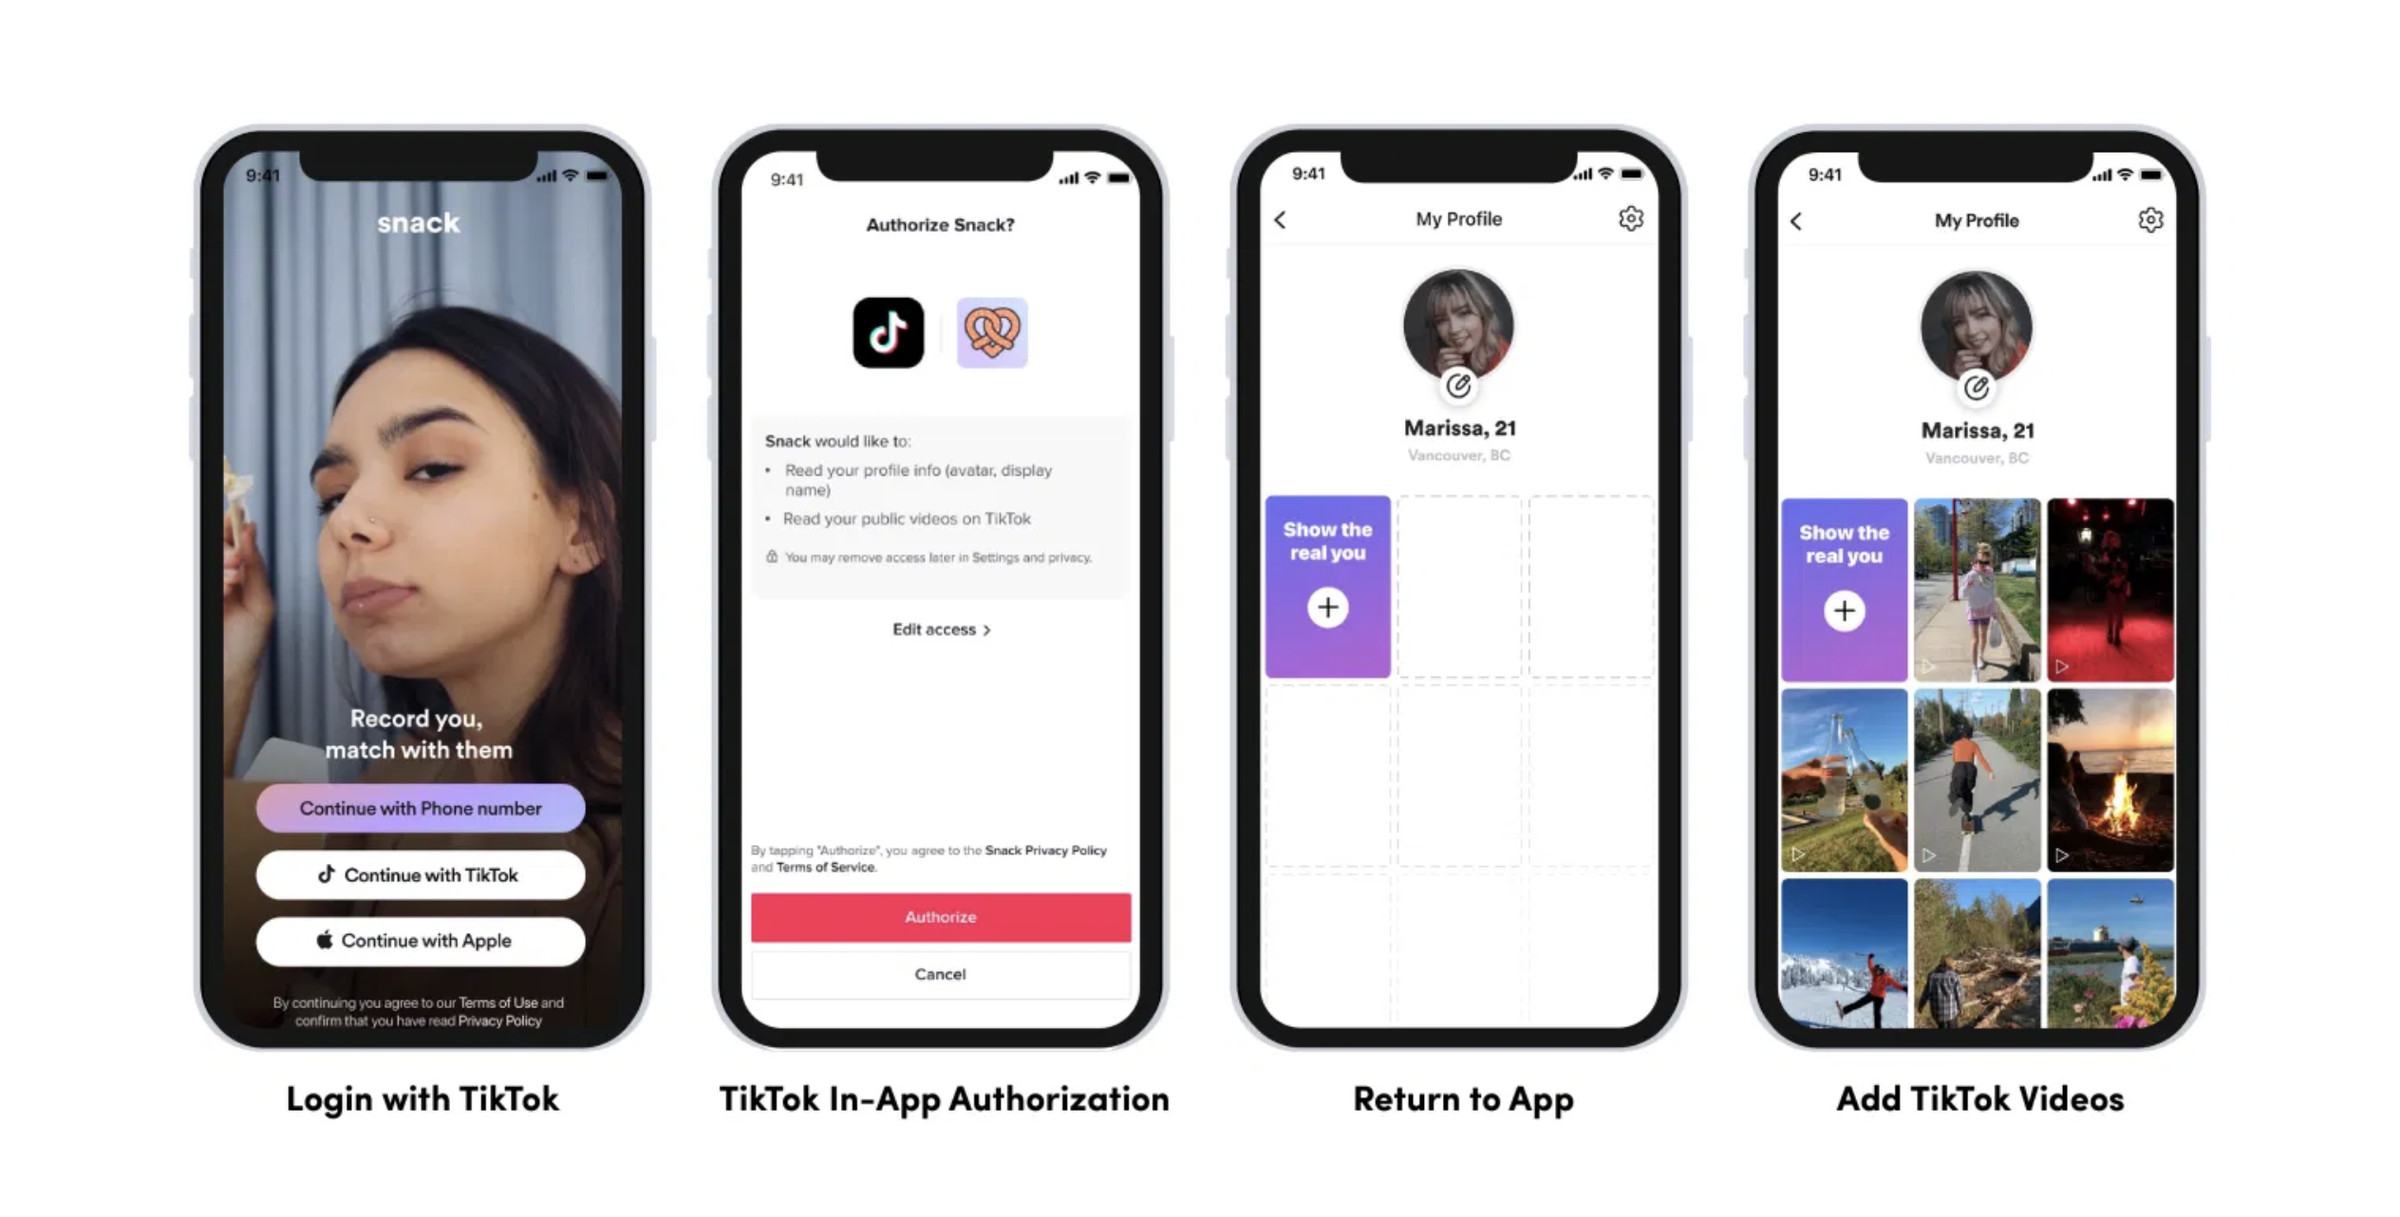 An example of the Login with TikTok experience.